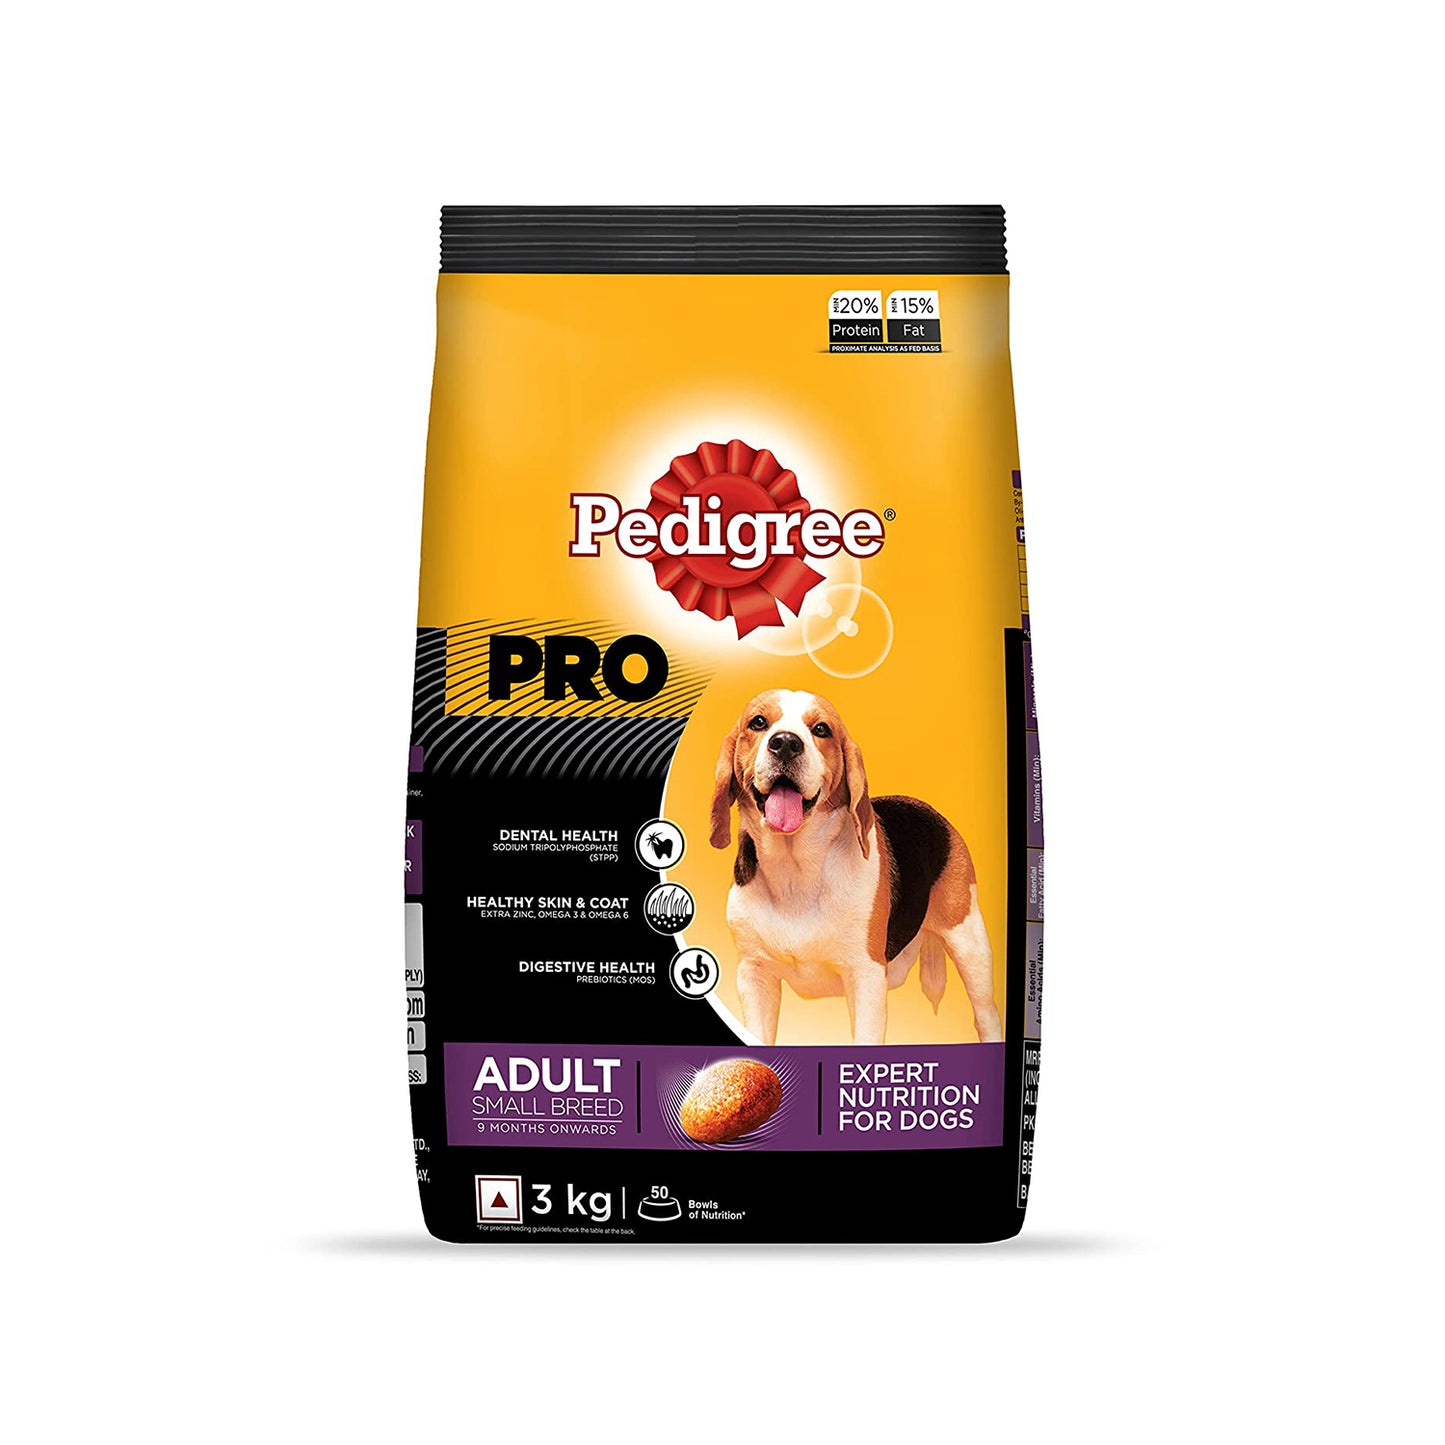 Pedigree - PRO Expert Nutrition Adult Small Breed Dogs (9 Months Onwards) Dry Dog Food